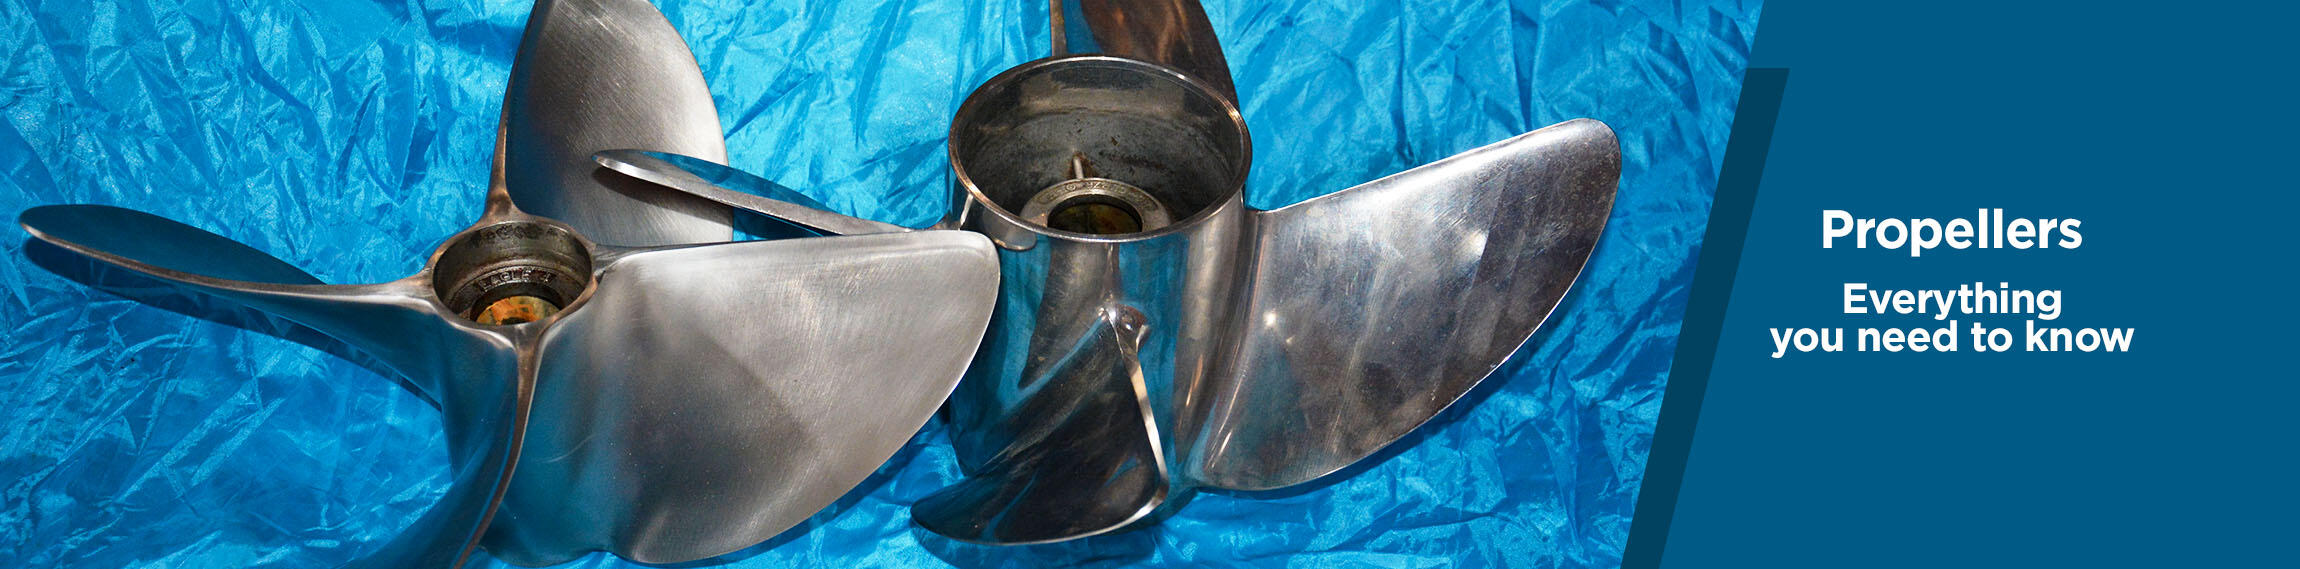 Propeller slip and its role to the boat’s performance